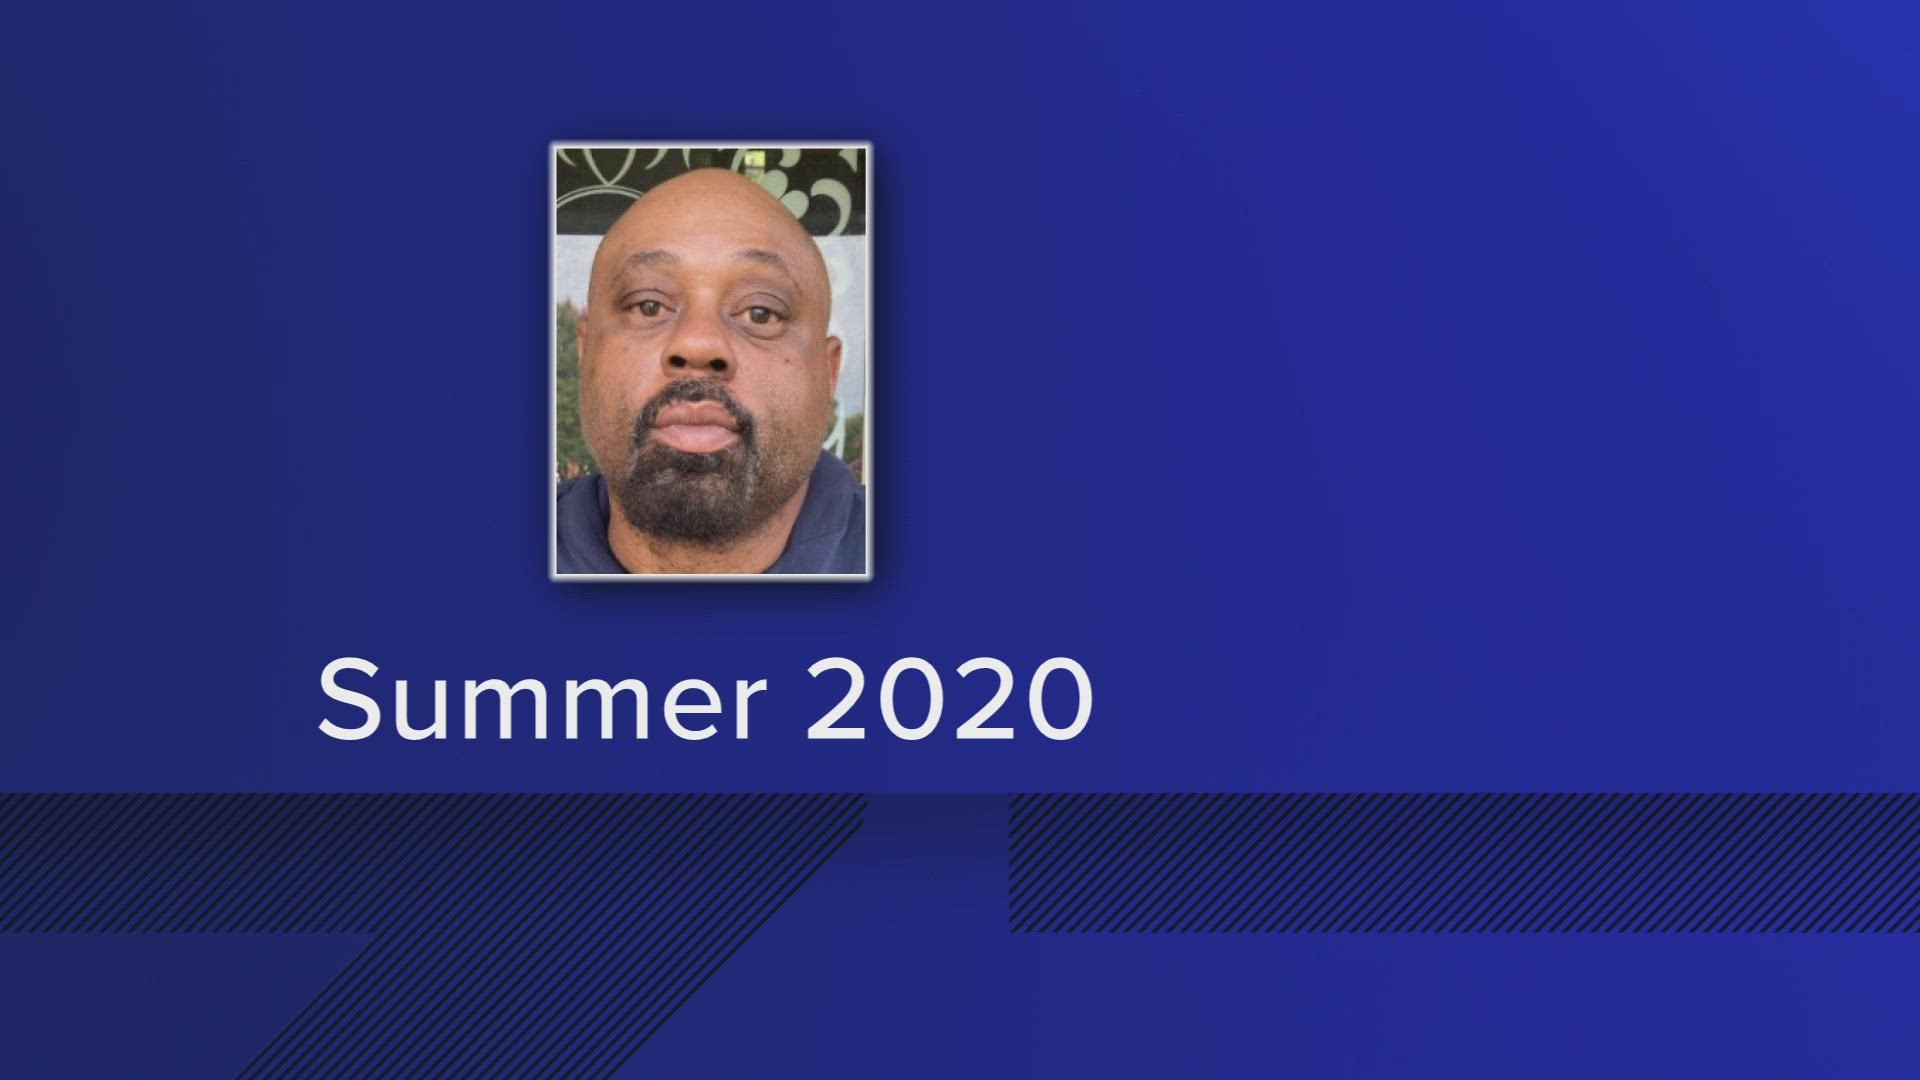 Authorities arrested a Fairfax middle school counselor of a sex crime in 2020. He would go on to keep his job for close to two years after the incident.